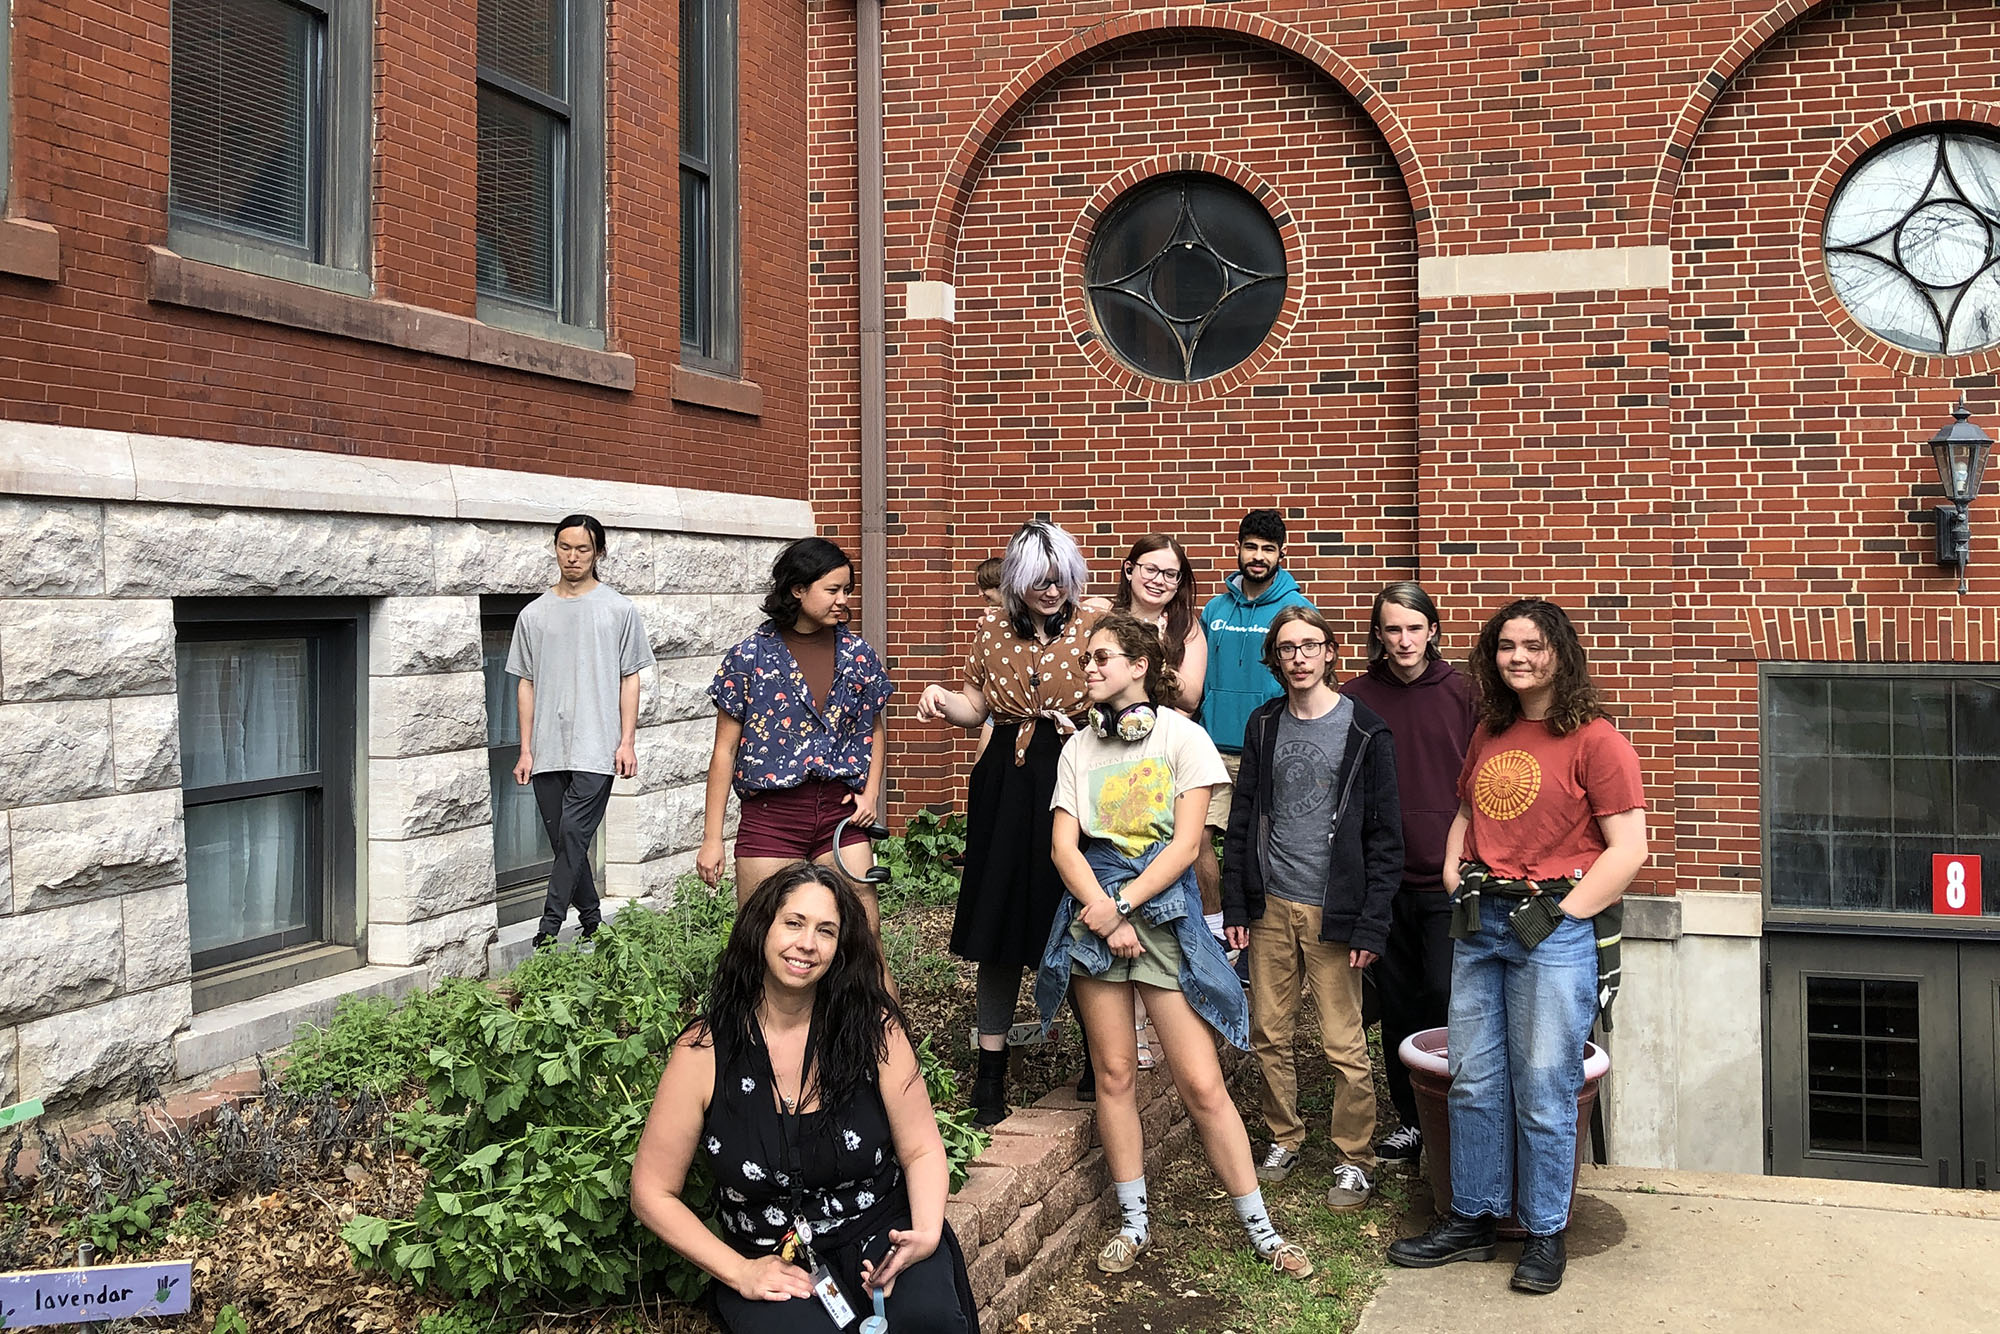 a candid shot of a group of 11 people around a garden bed against a backdrop of an historic brick and stone building.